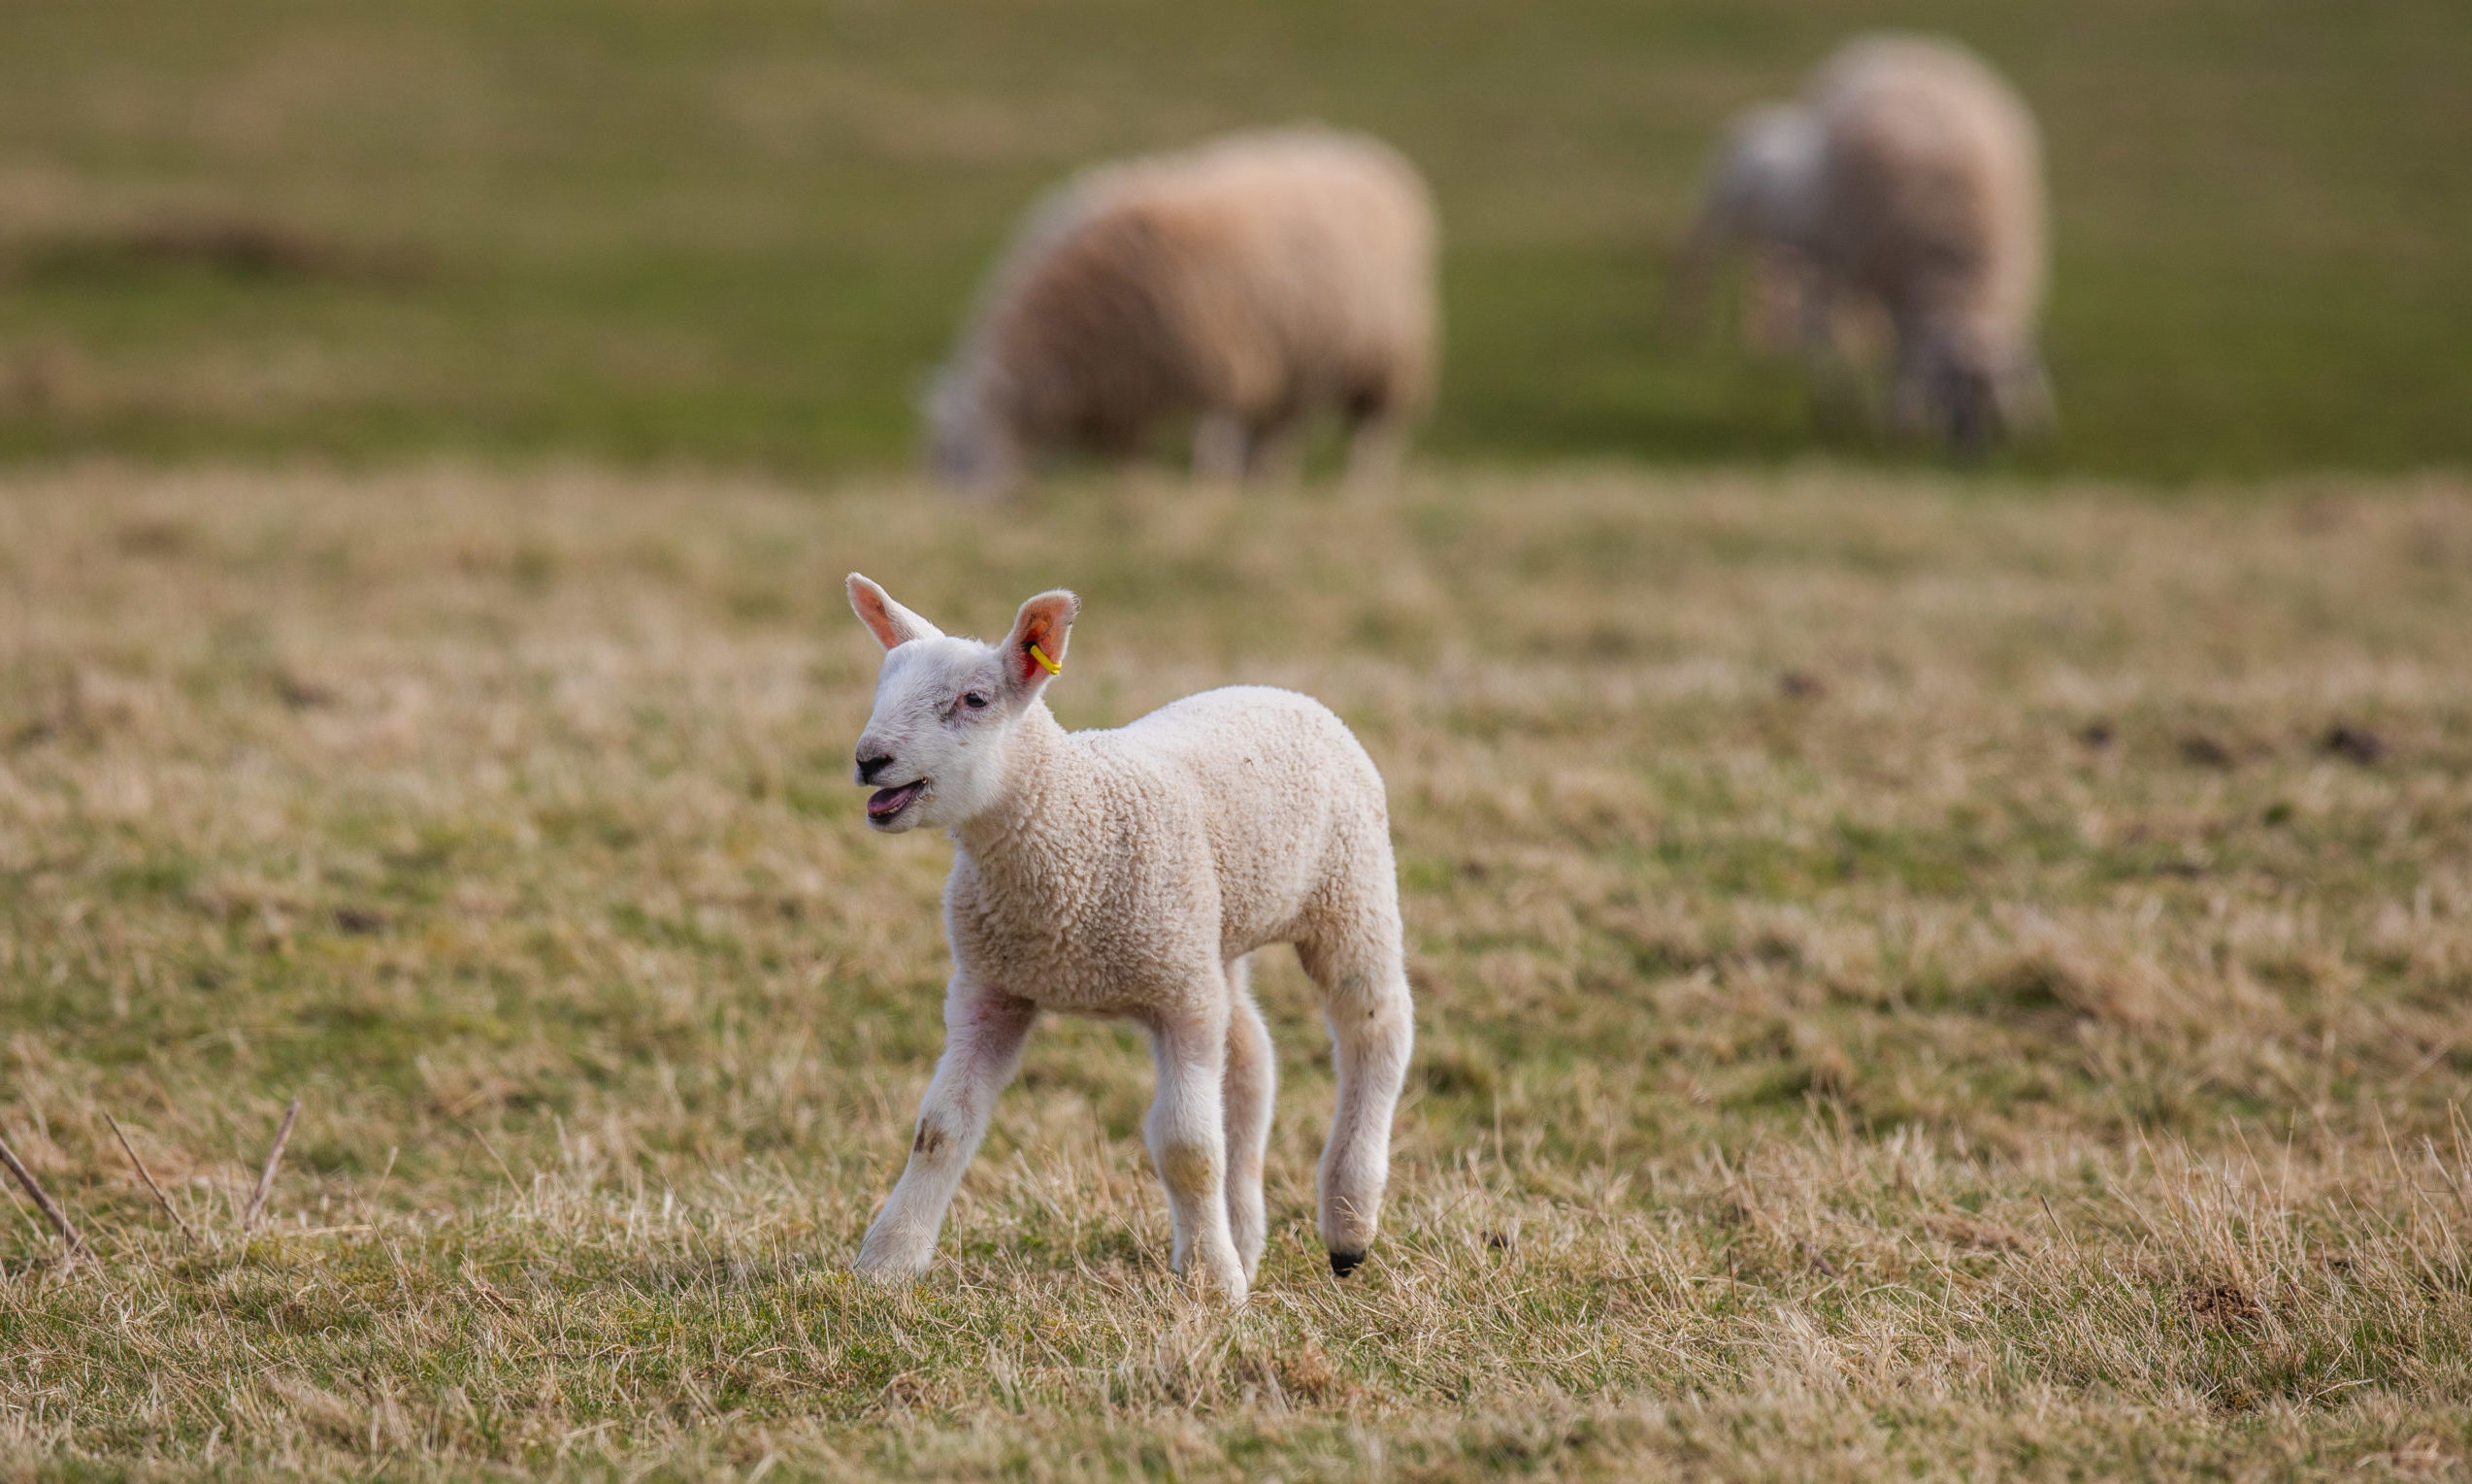 Courier News, unknown reporter Story, CR0020696 Coronavirus / COVID-19 / lockdown -- Picture of the day options -- scenics. Picture shows spring lamb in a field near Forteviot / sheep -- Fields by Forteviot - Friday 3rd April 2020  Pic Credit - Steve MacDougall / DCT Media